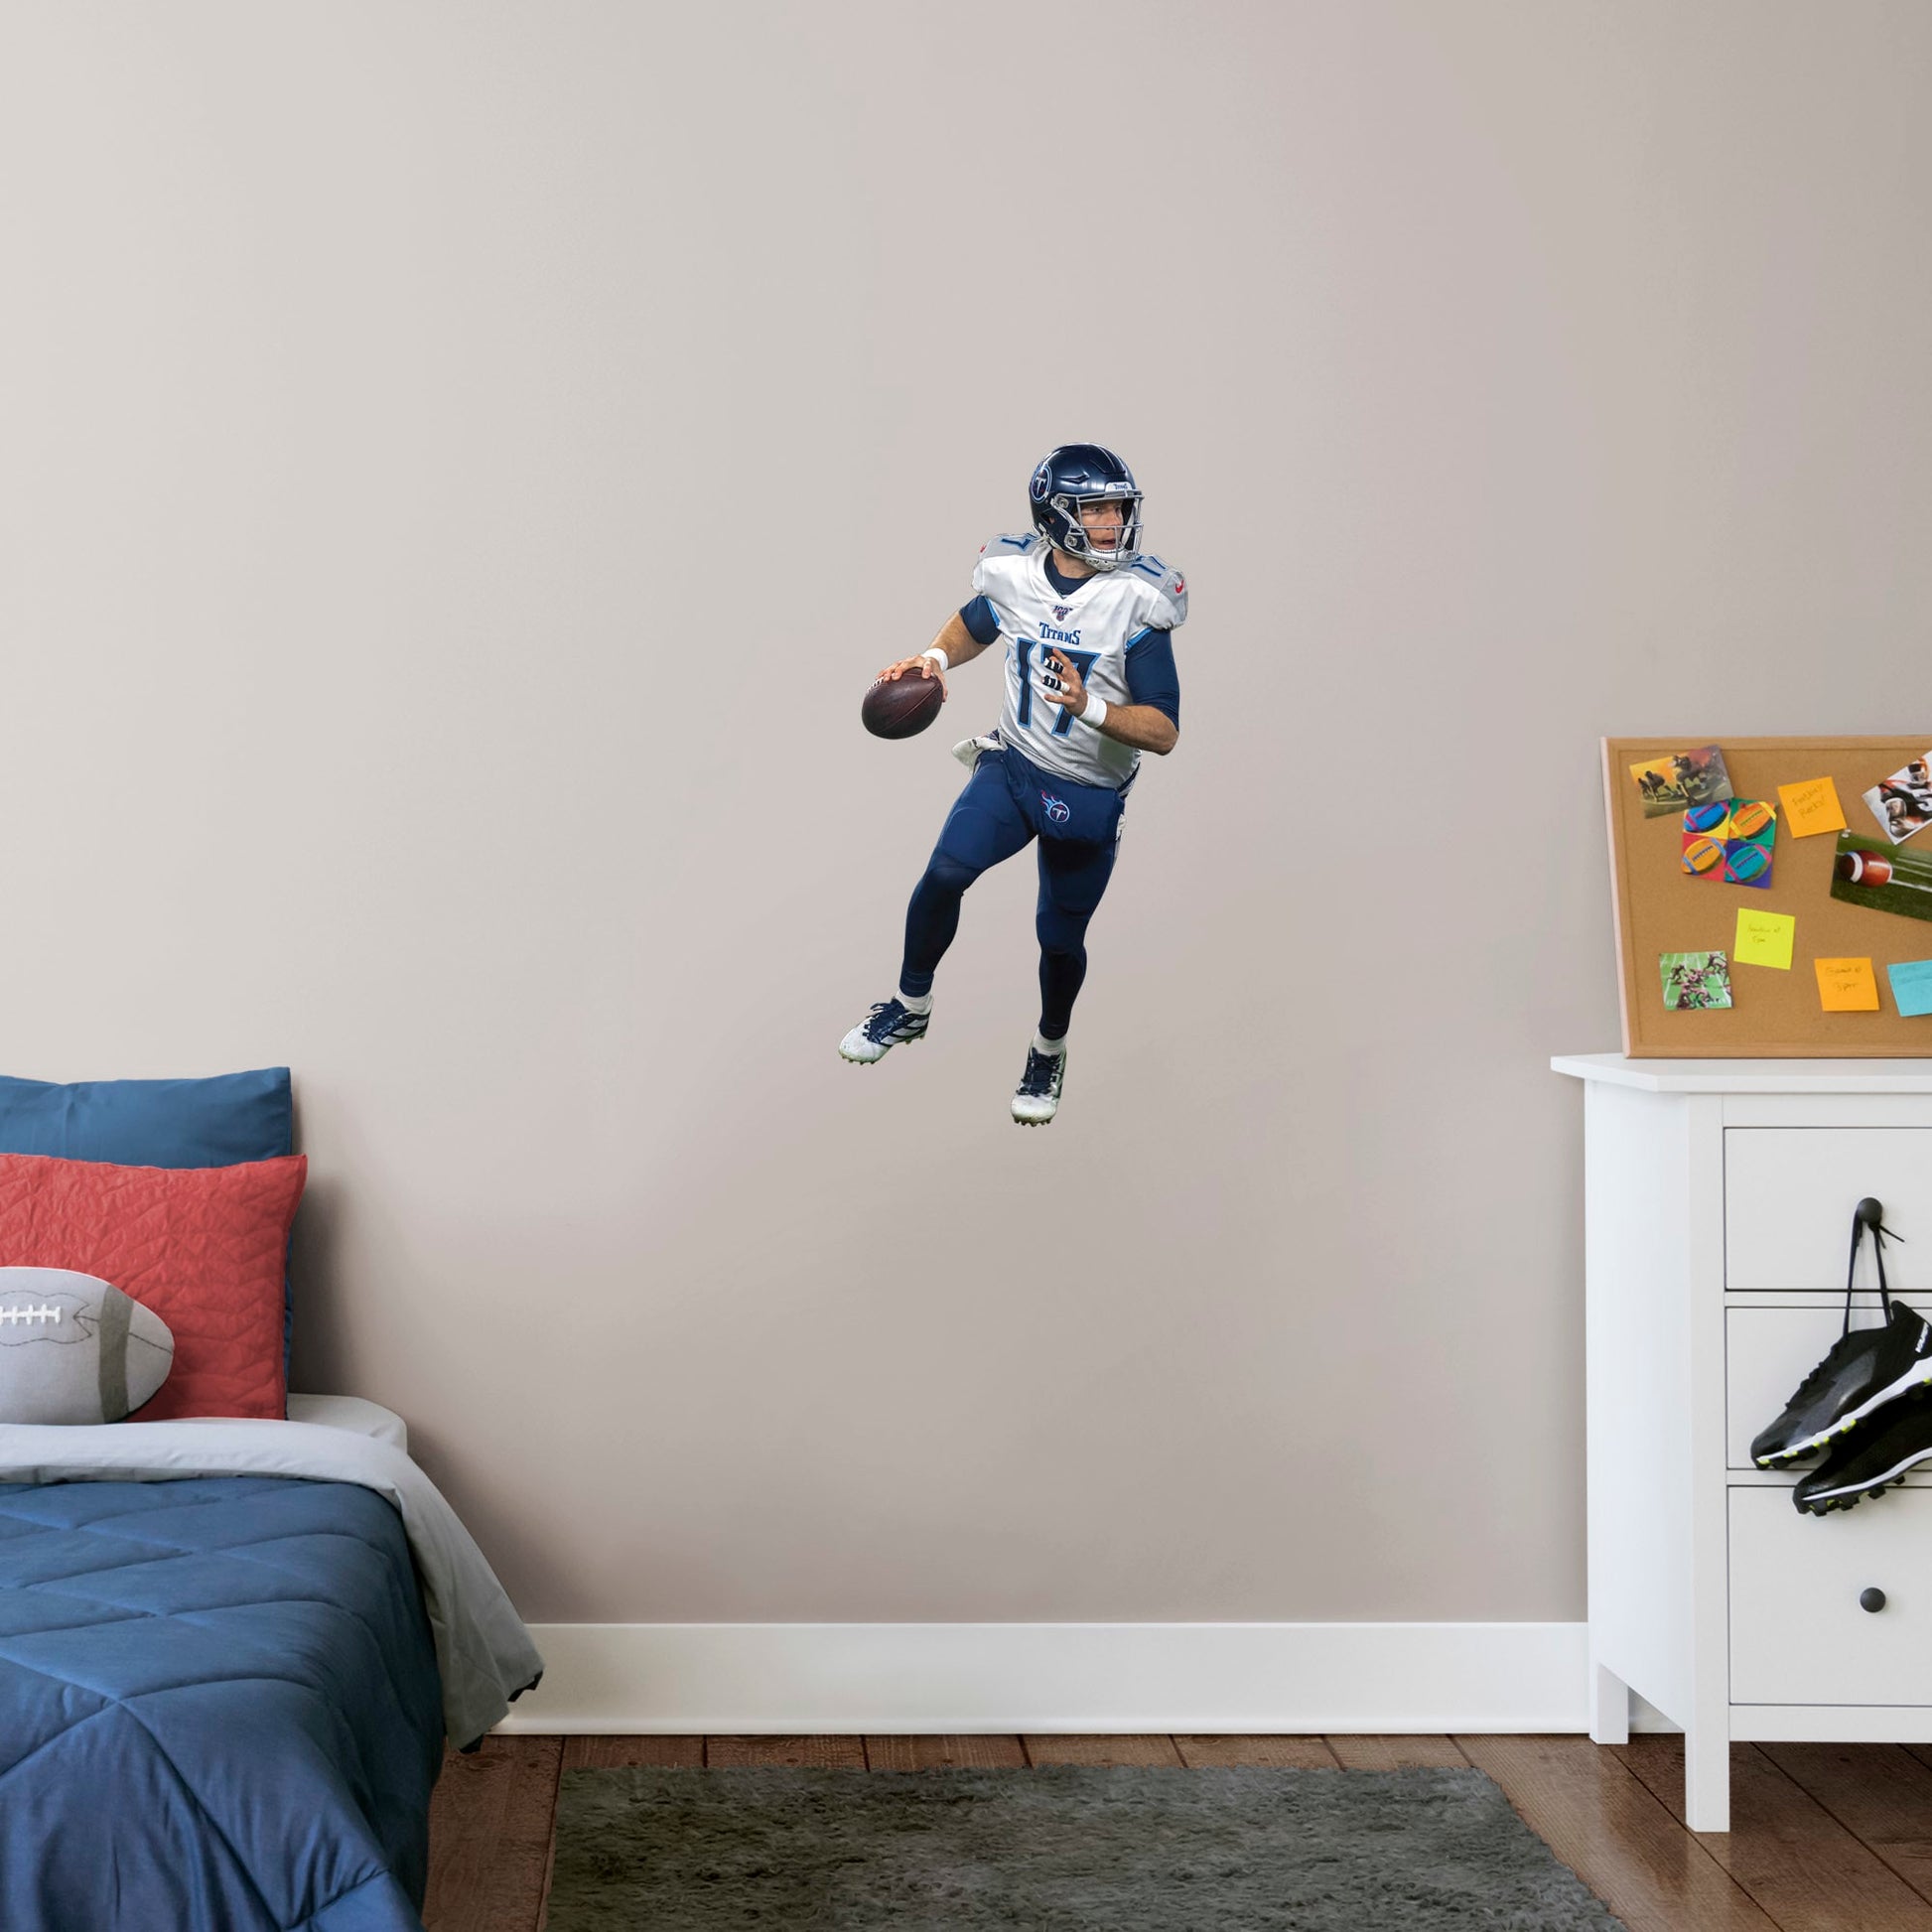 X-Large Athlete + 2 Decals (18"W x 38"H) Show off your support for the NFL 2019 Comeback Player of the Year, Ryan Tannehill, with this officially licensed wall decal of the Tennessee Titan quarterback. Considered one of the best quarterbacks in the NFL, Tannessee is geared up to complete the pass and dominate the AFC South in any bedroom, sports bar, or fan cave with this high-quality wall decal in the iconic Titans navy blue and silver uniform. Nashville isn't just for music, Let's go Titans!